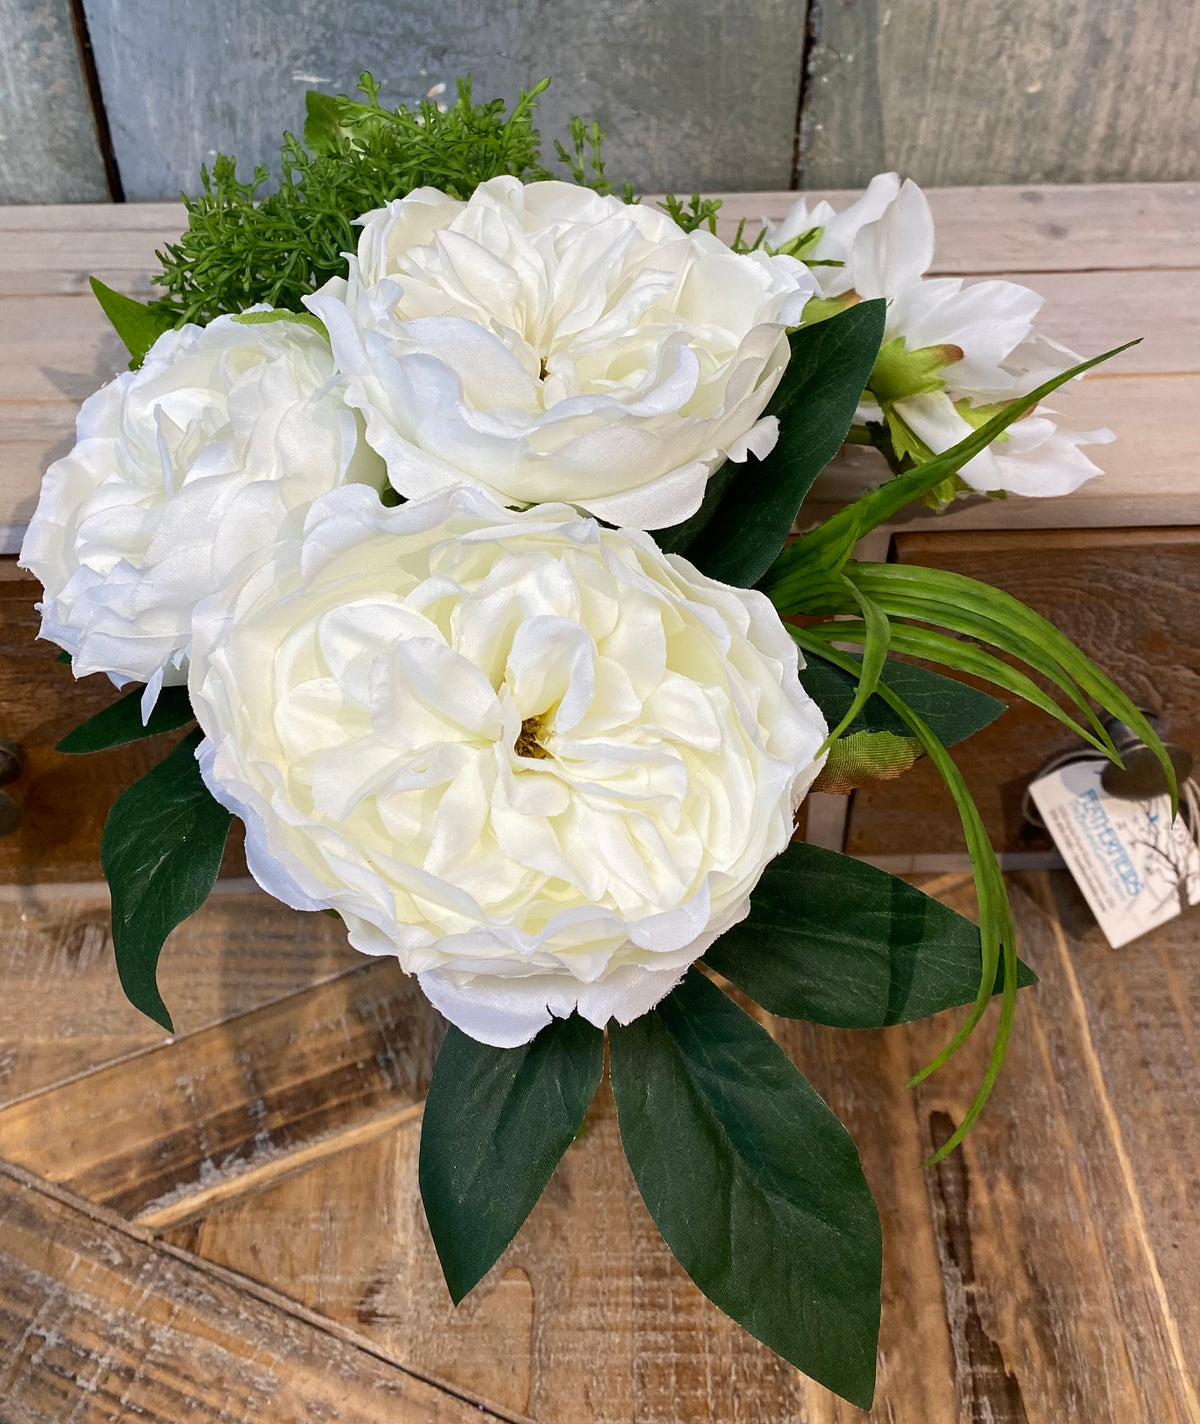 Bouquet of White Roses with Leaves